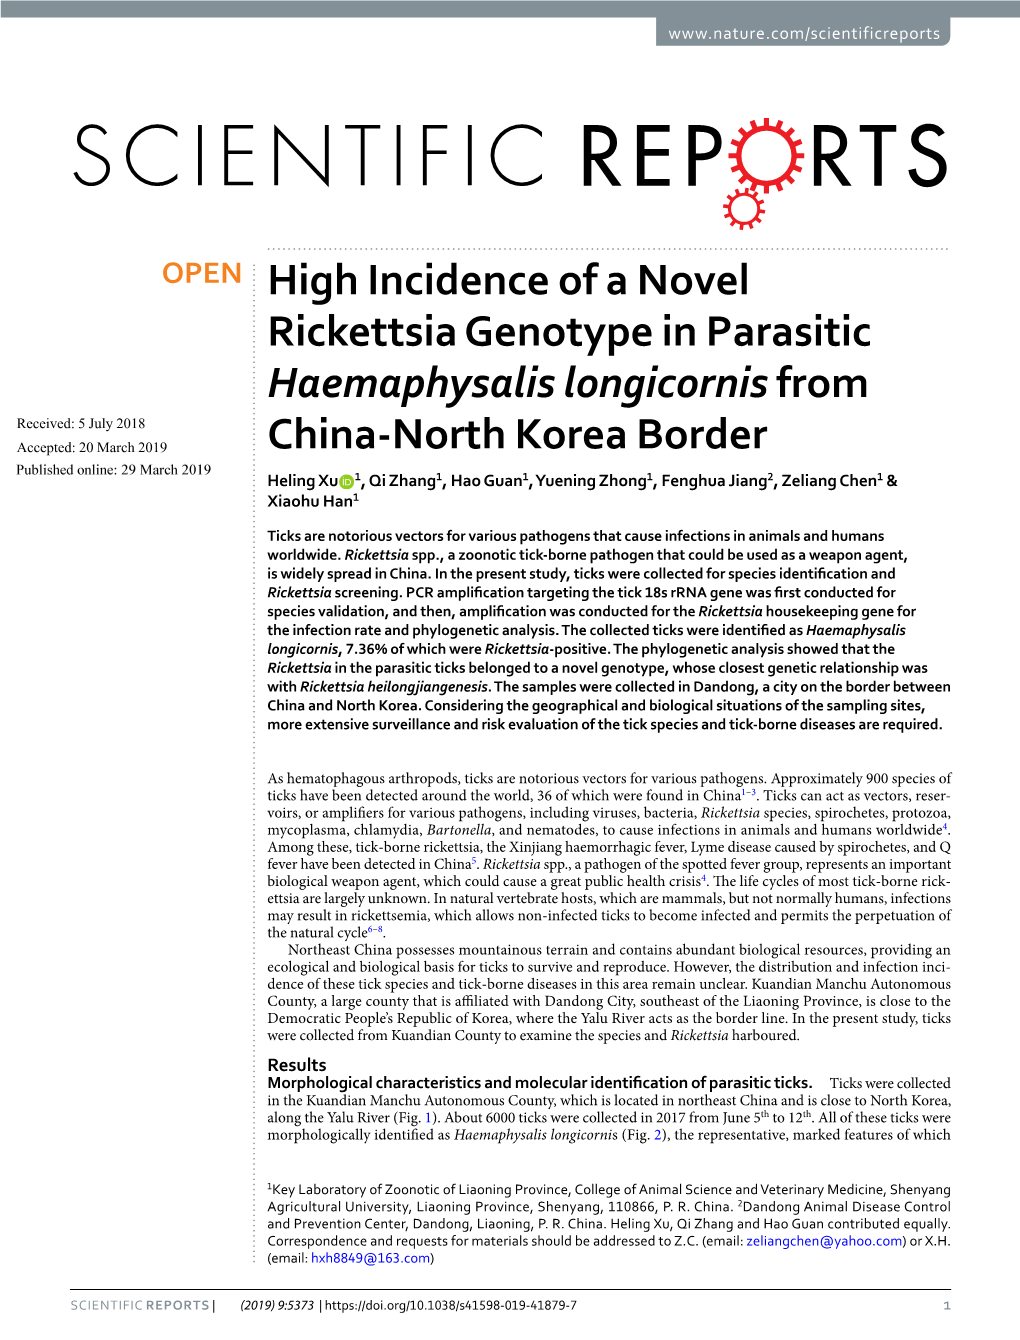 High Incidence of a Novel Rickettsia Genotype in Parasitic